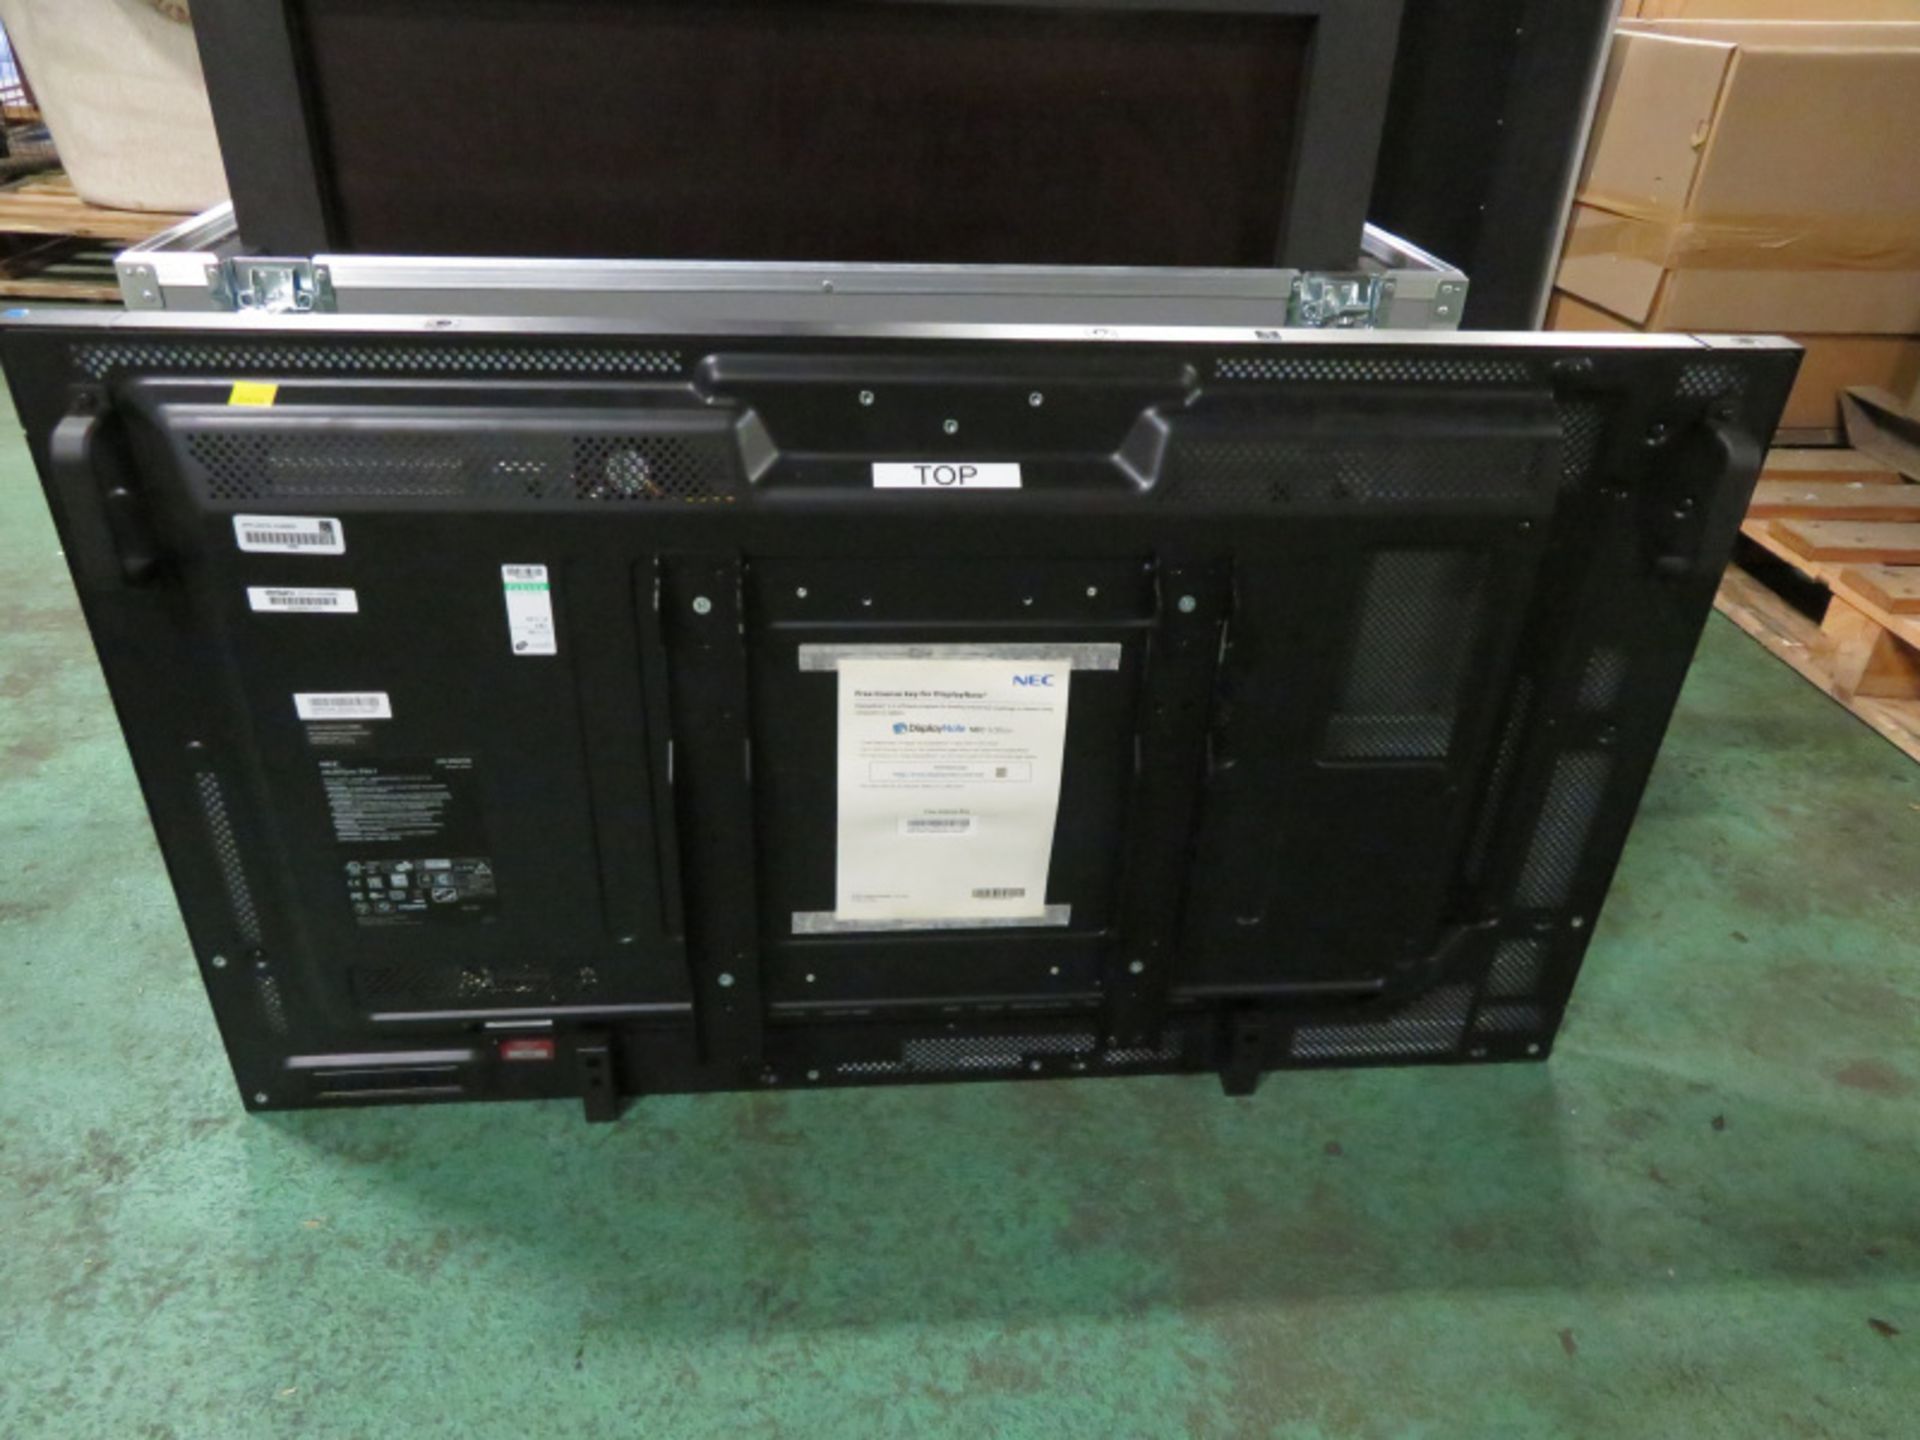 NEC P463 MultiSync 46in LCD Monitor & Transport Case - W 1210mm x D 390mm x H 850mm - Image 3 of 6